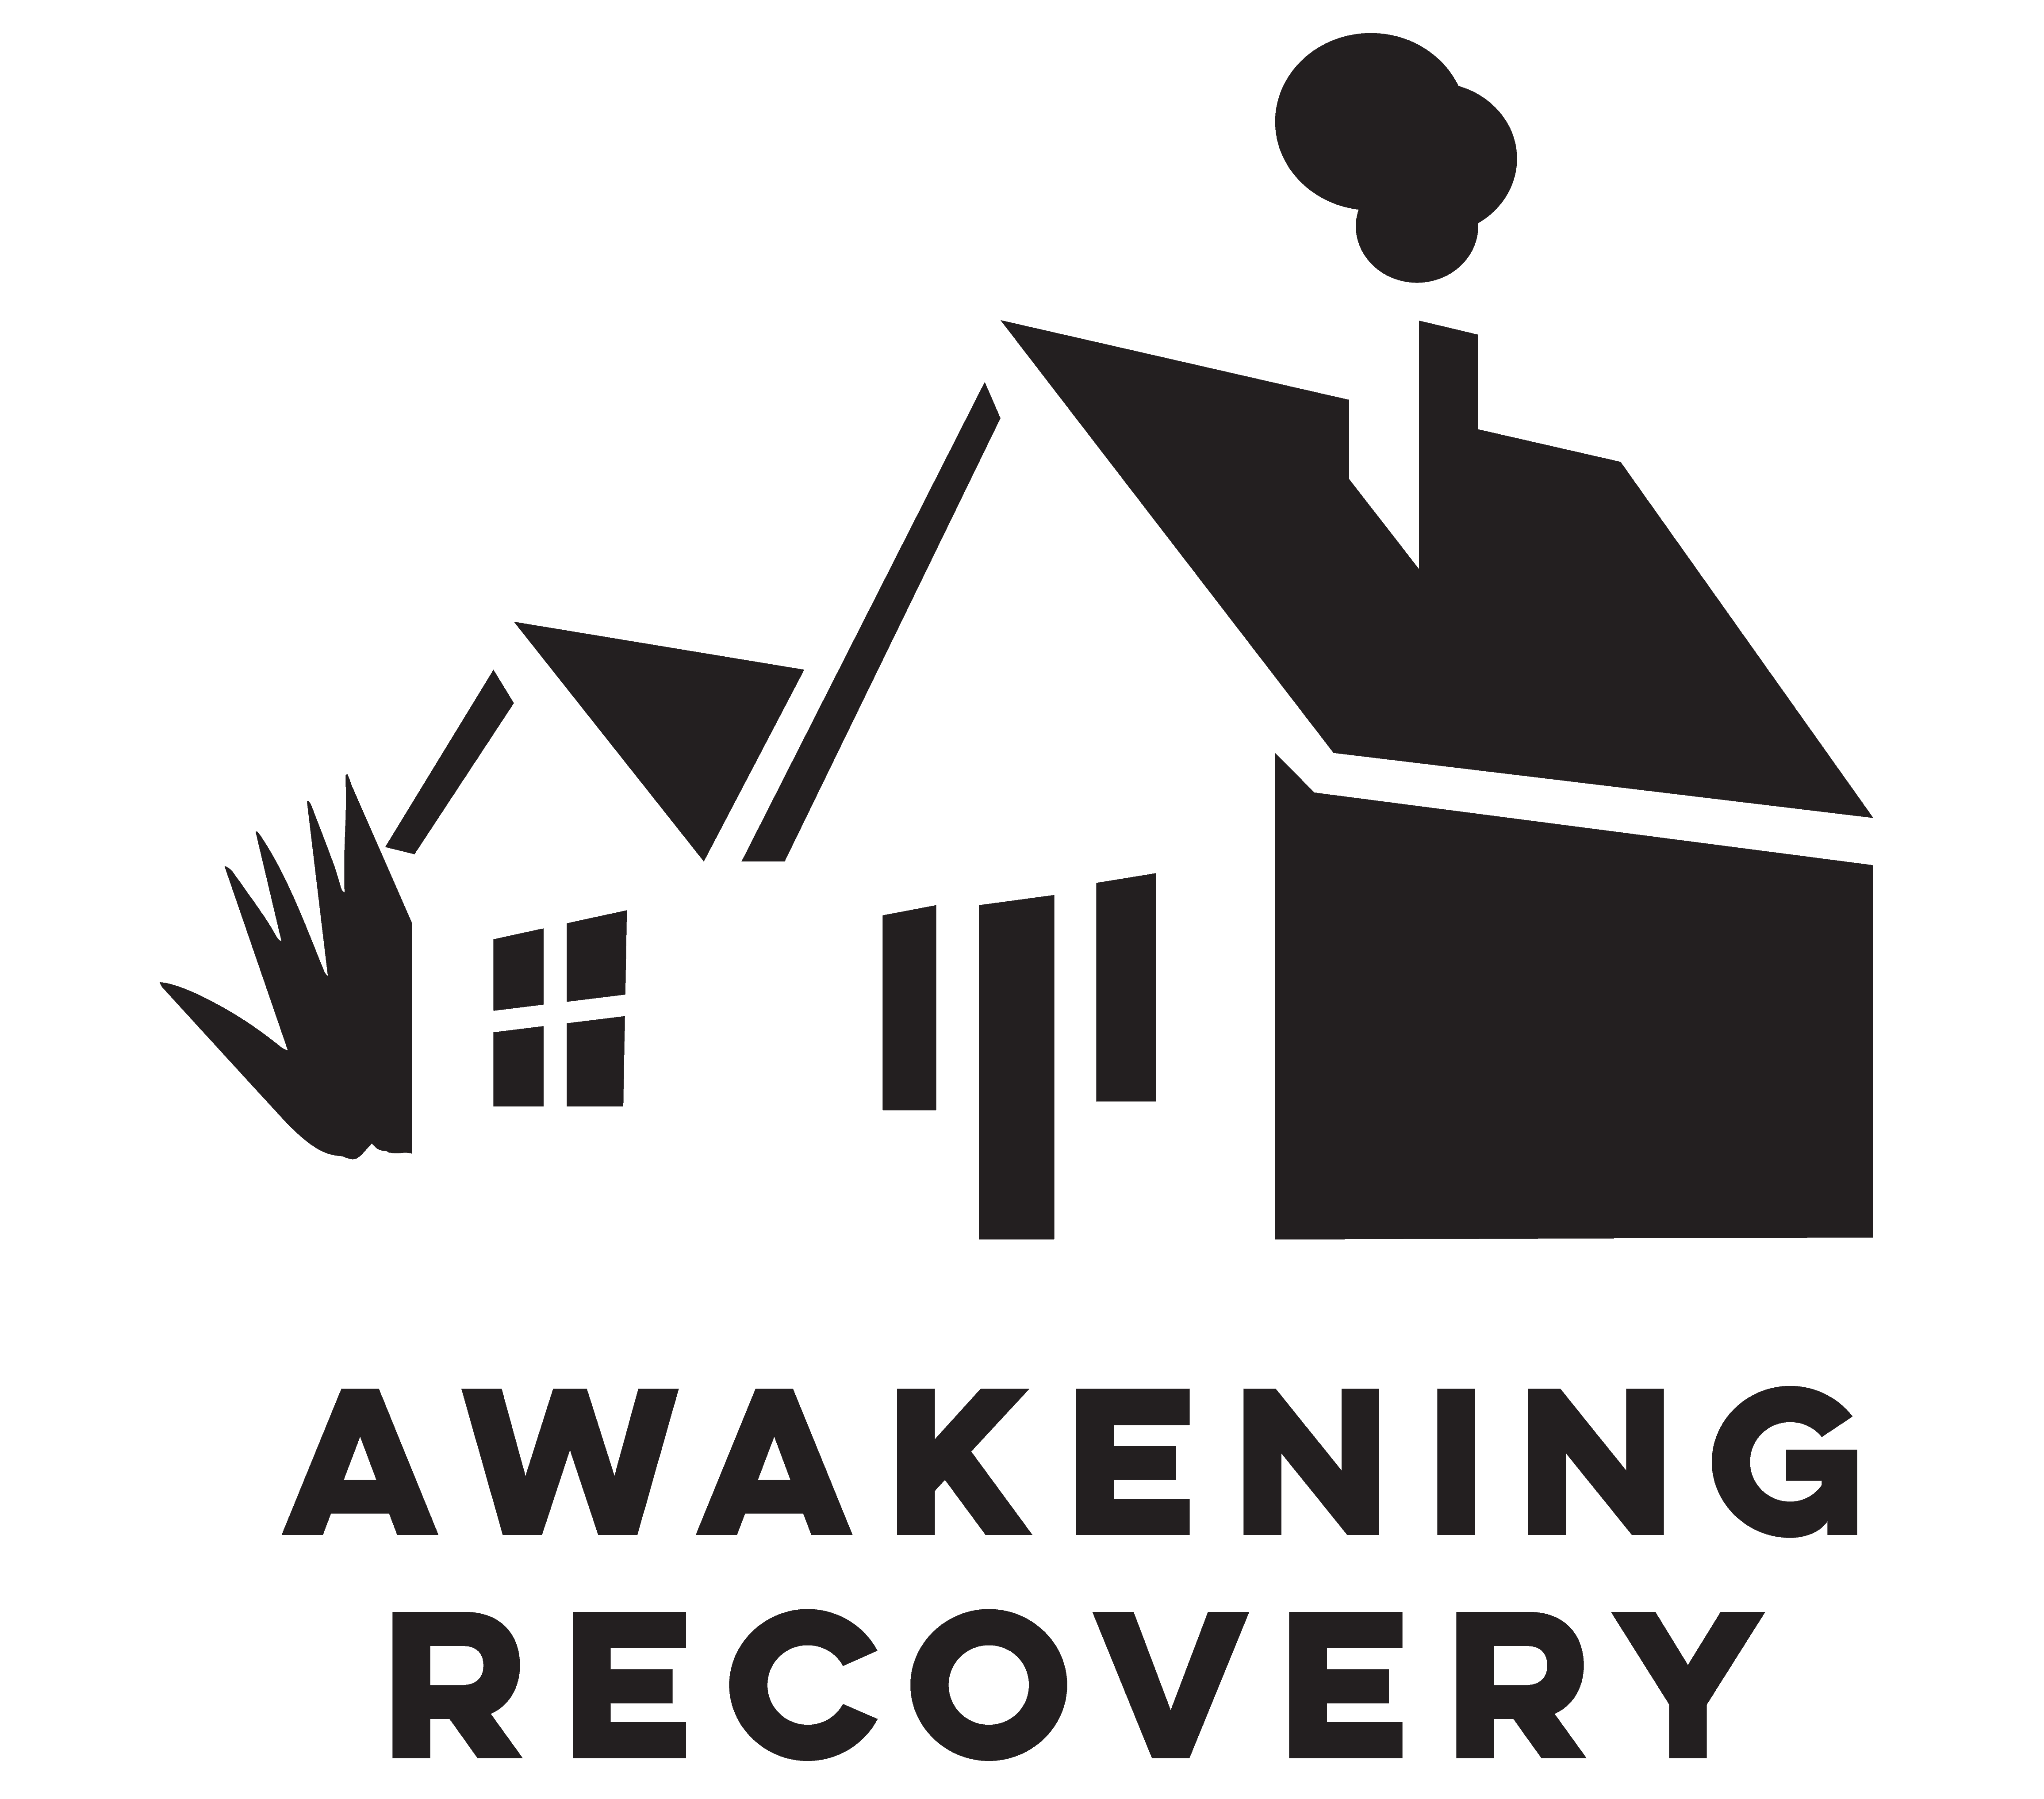 You are currently viewing Awakening Recovery 990 for 2020